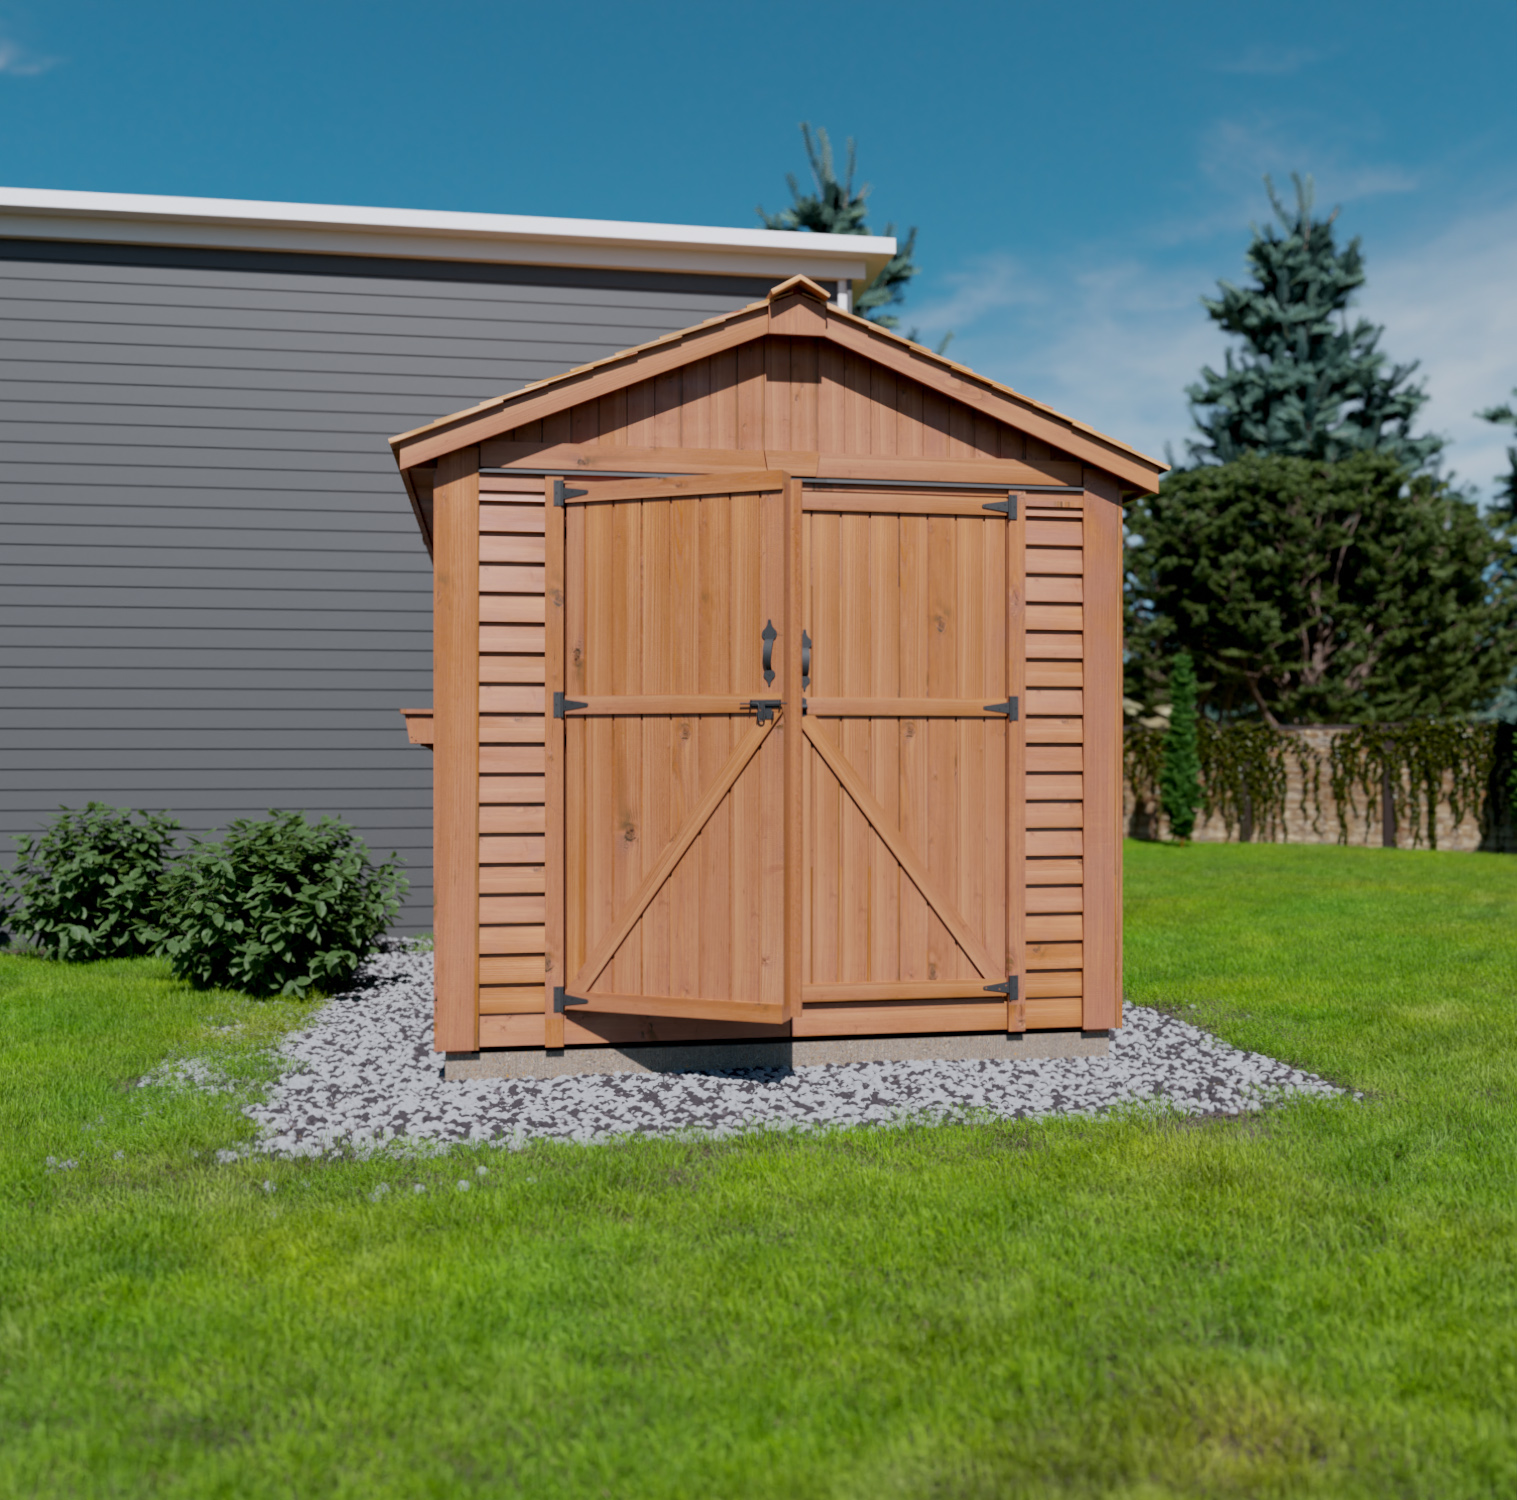 Space Master Cedar Shed 8x12 Outdoor Living Today Center Angle